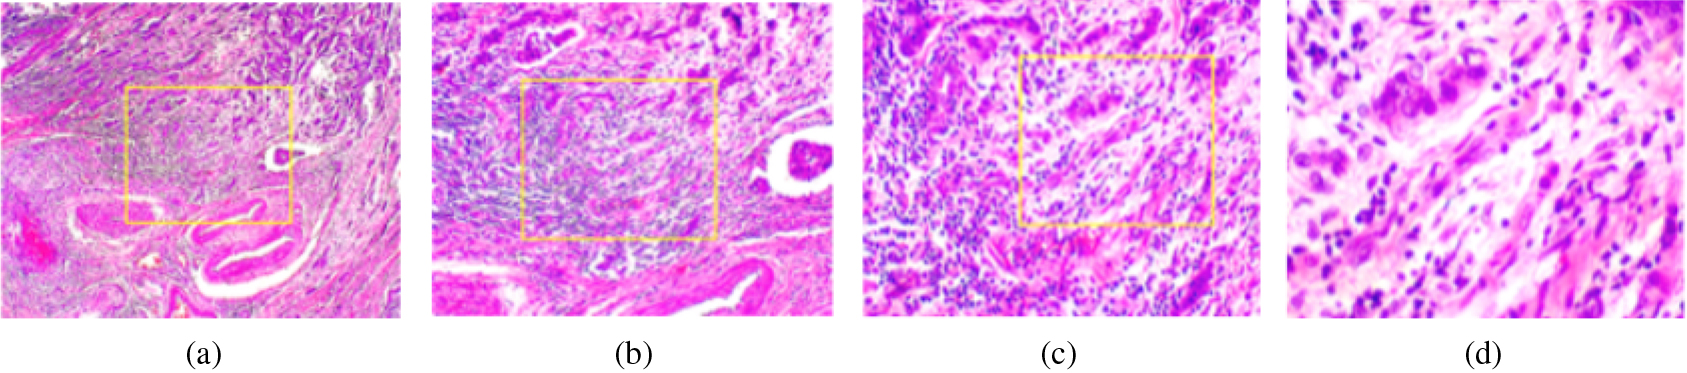 Samples of breast histopathology images acquired from BreakHis data set, illustrated in different magnification factors [76]. (a) 40X, (b) 100X, (c) 200X, and (d) 400X. 